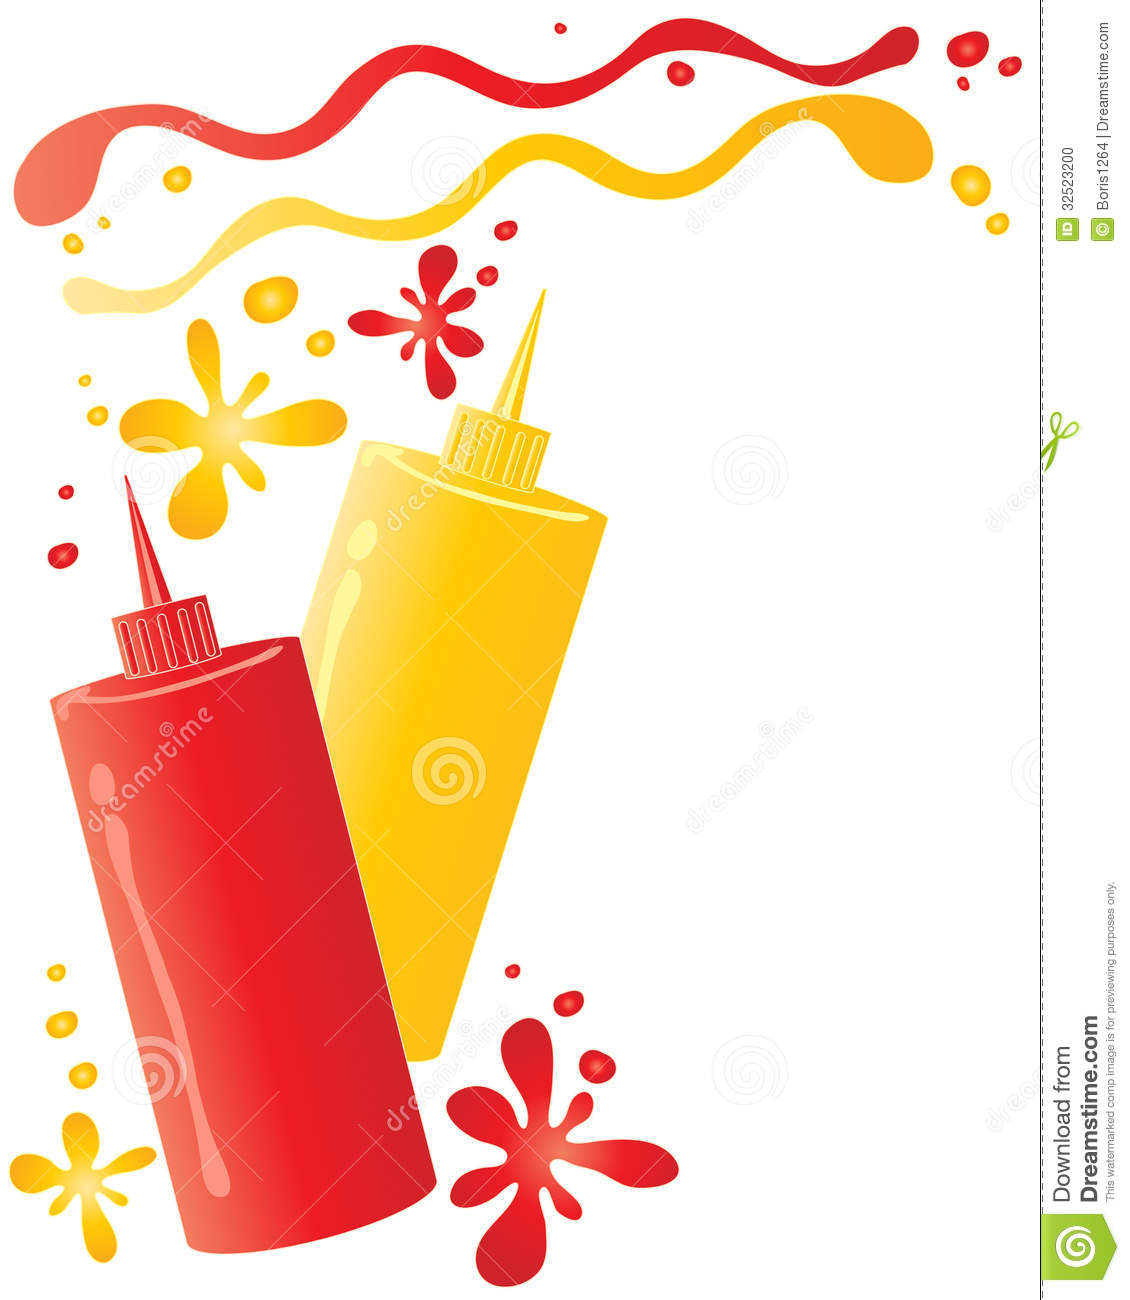 An Illustration Of Two Sauce Bottles Containing Ketchup And Mustard